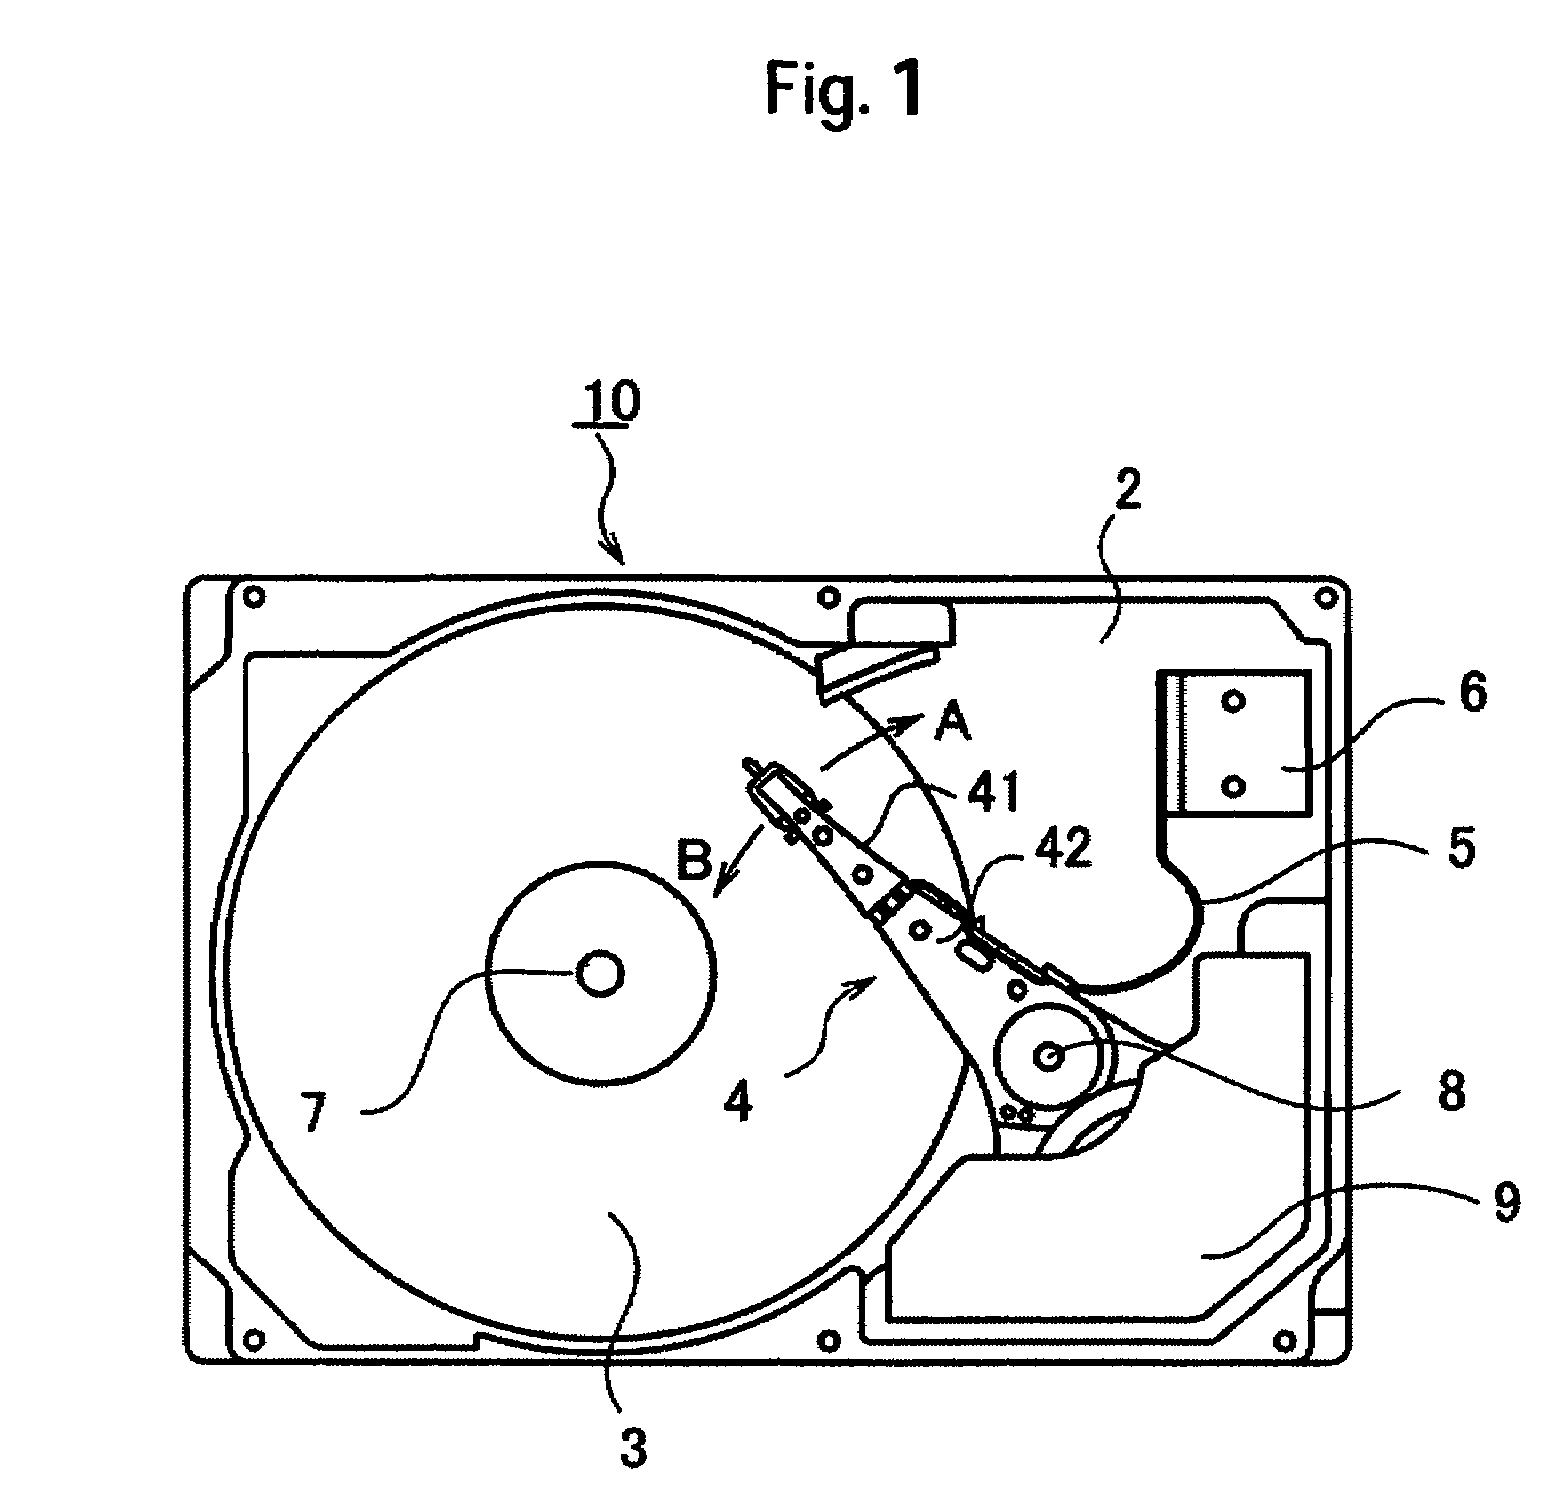 Head gimbal assembly and magnetic disk drive with specific solder ball or slider pad and electrode stud dimensioning to produce reliable solder ball connection using laser energy